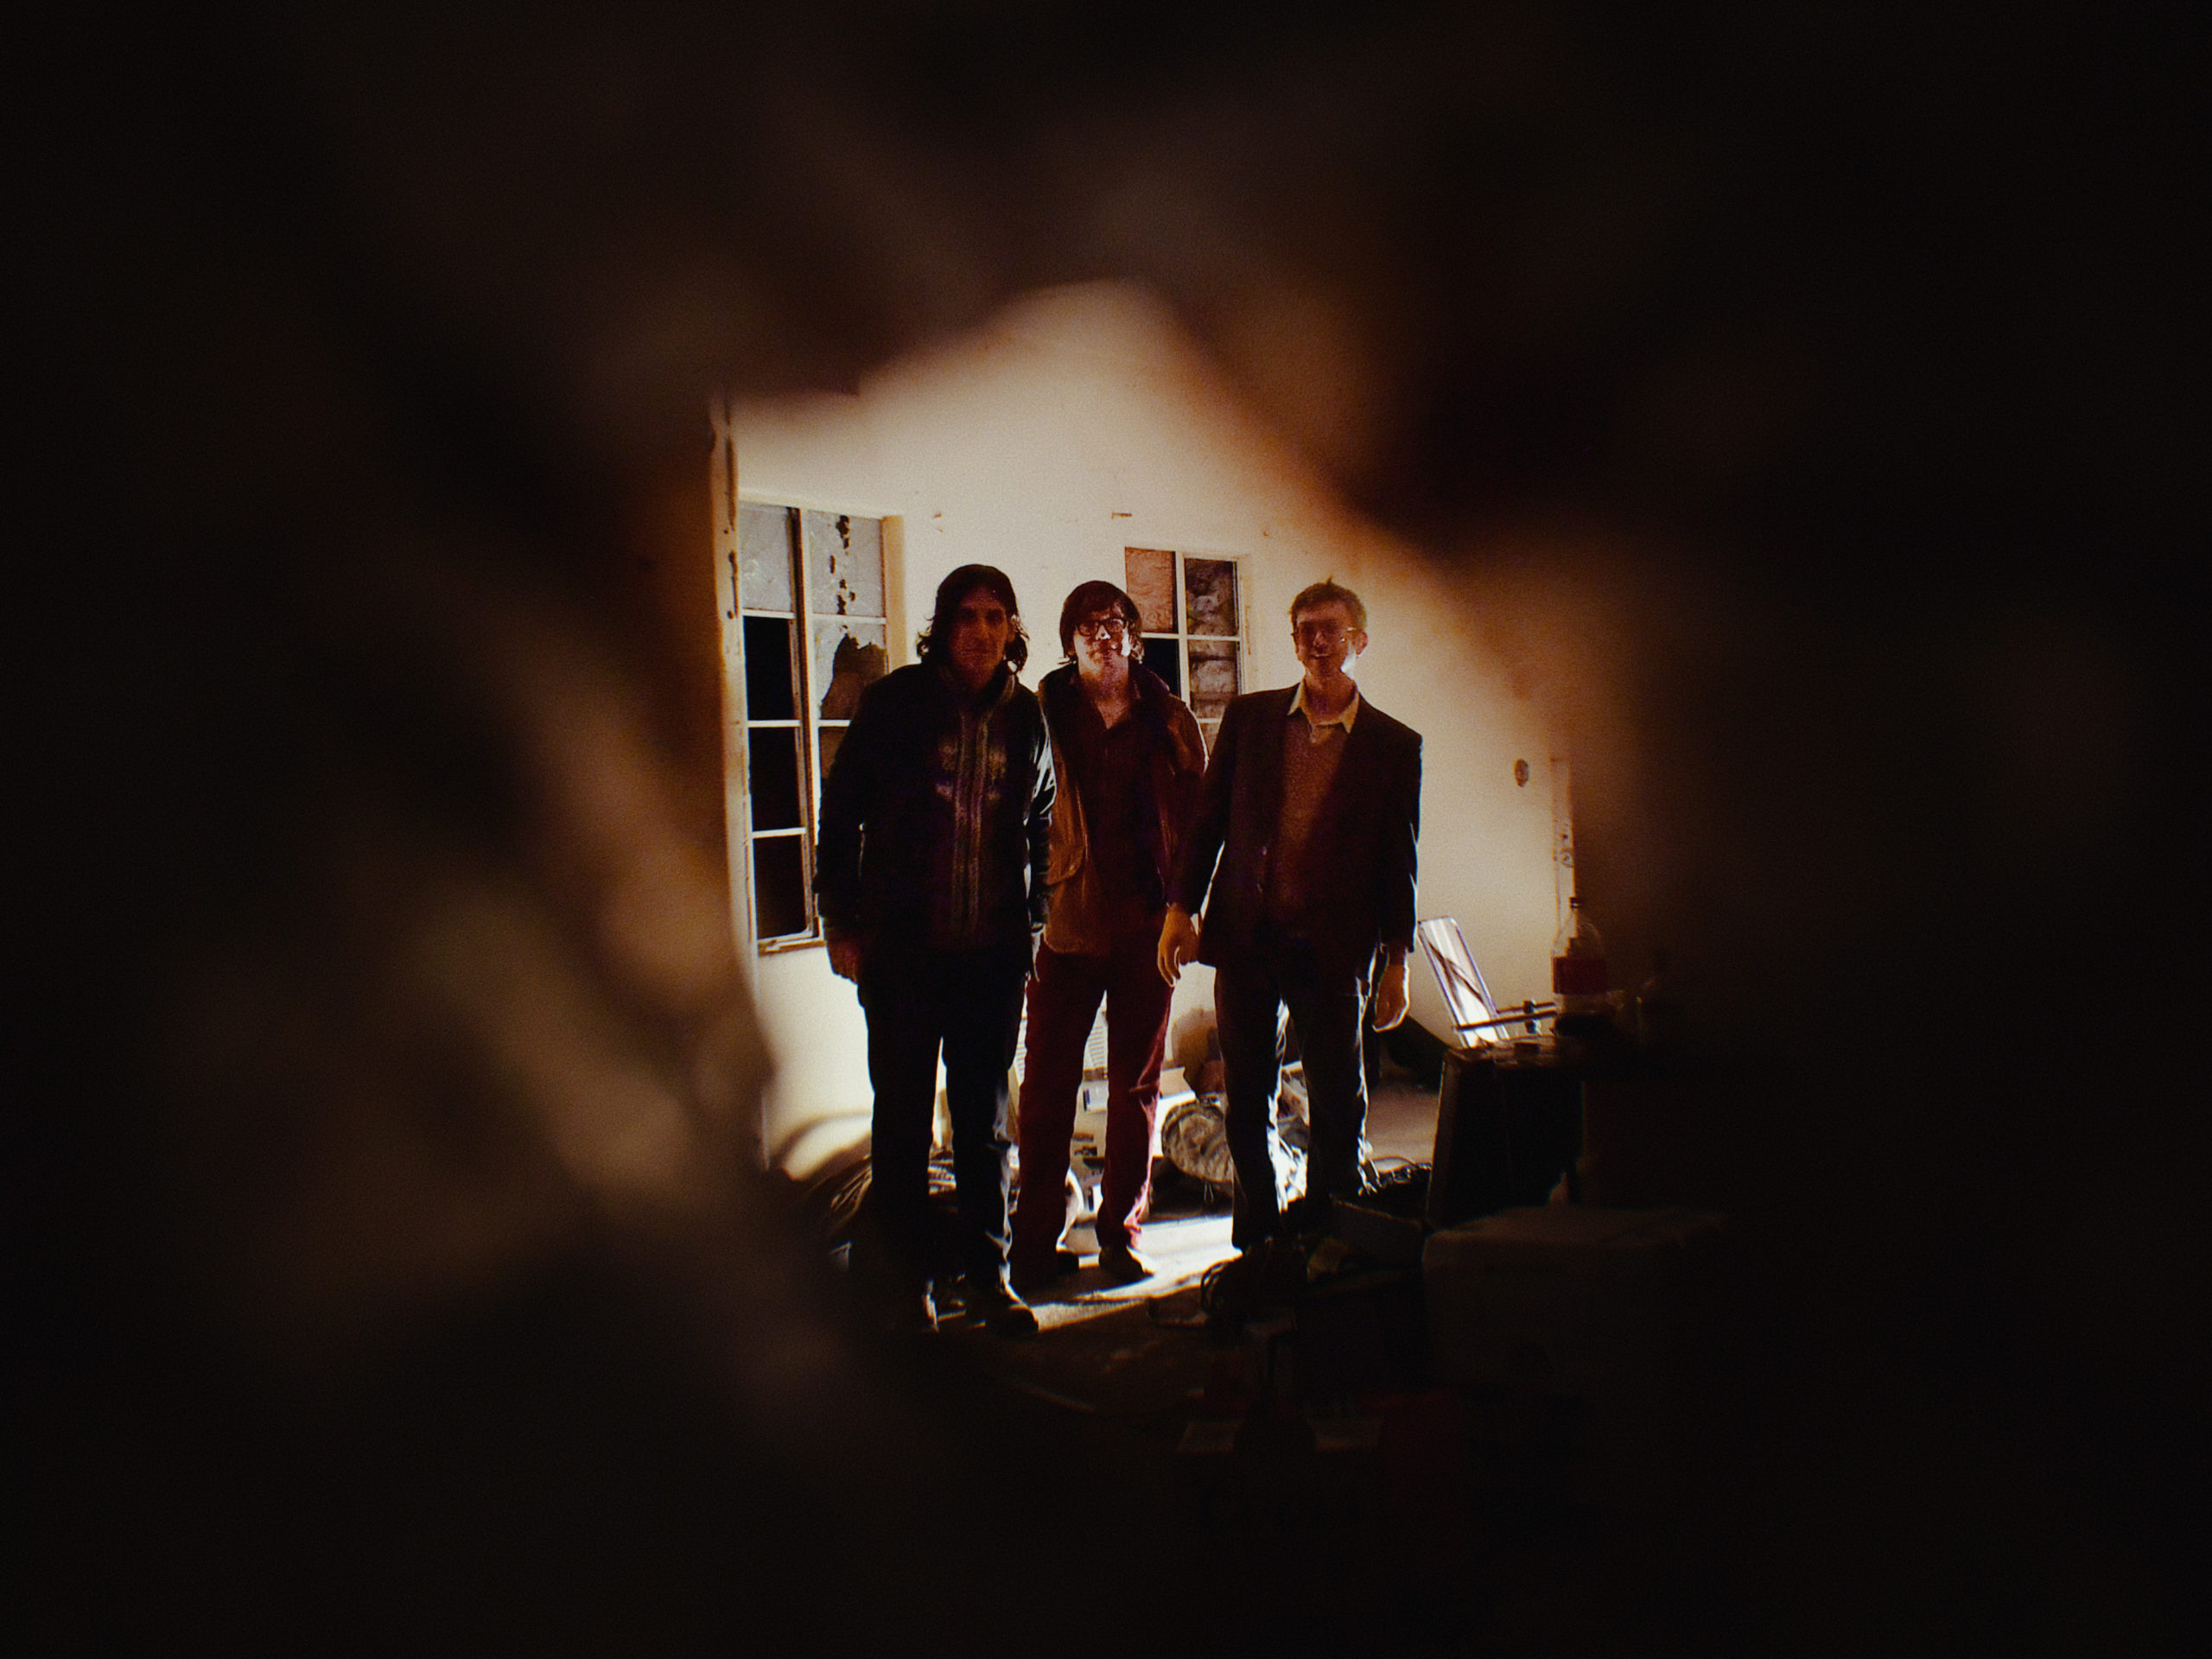 Dead Meadow band members posing for photo looking out from a dark room